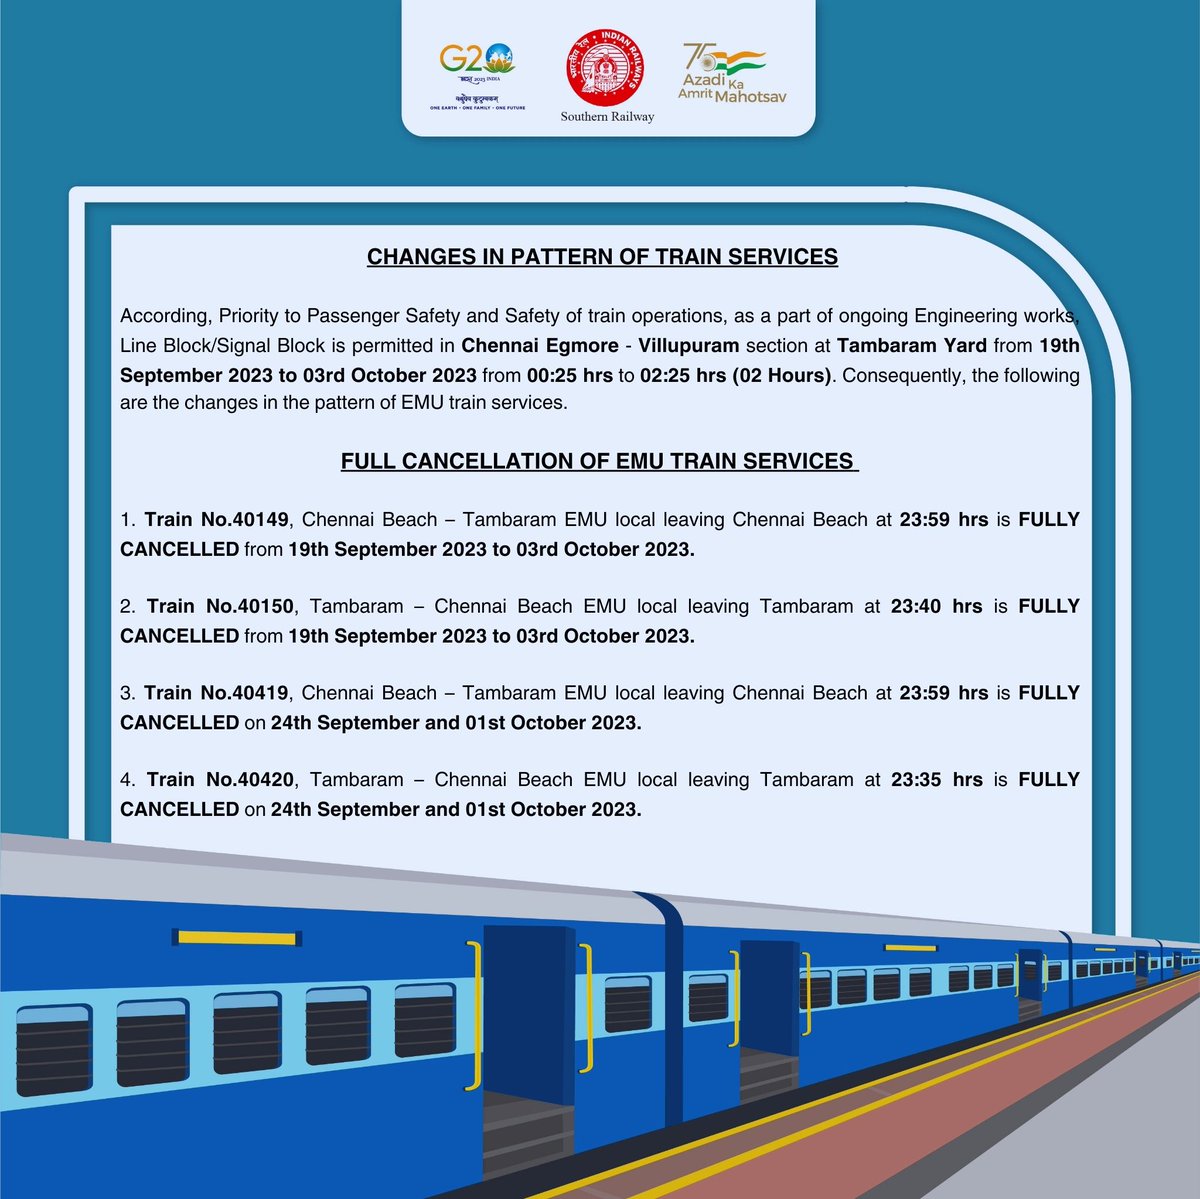 From September 19th to October 3rd, 2023, we'll be making some changes to EMU train services in the Chennai Egmore - Villupuram section due to ongoing engineering works at Tambaram Yard.

#RailwayUpdates #RailwayAlert #Chennai #TrainTravel #Tambaram #ChennaiBeach #PlanYourJourney